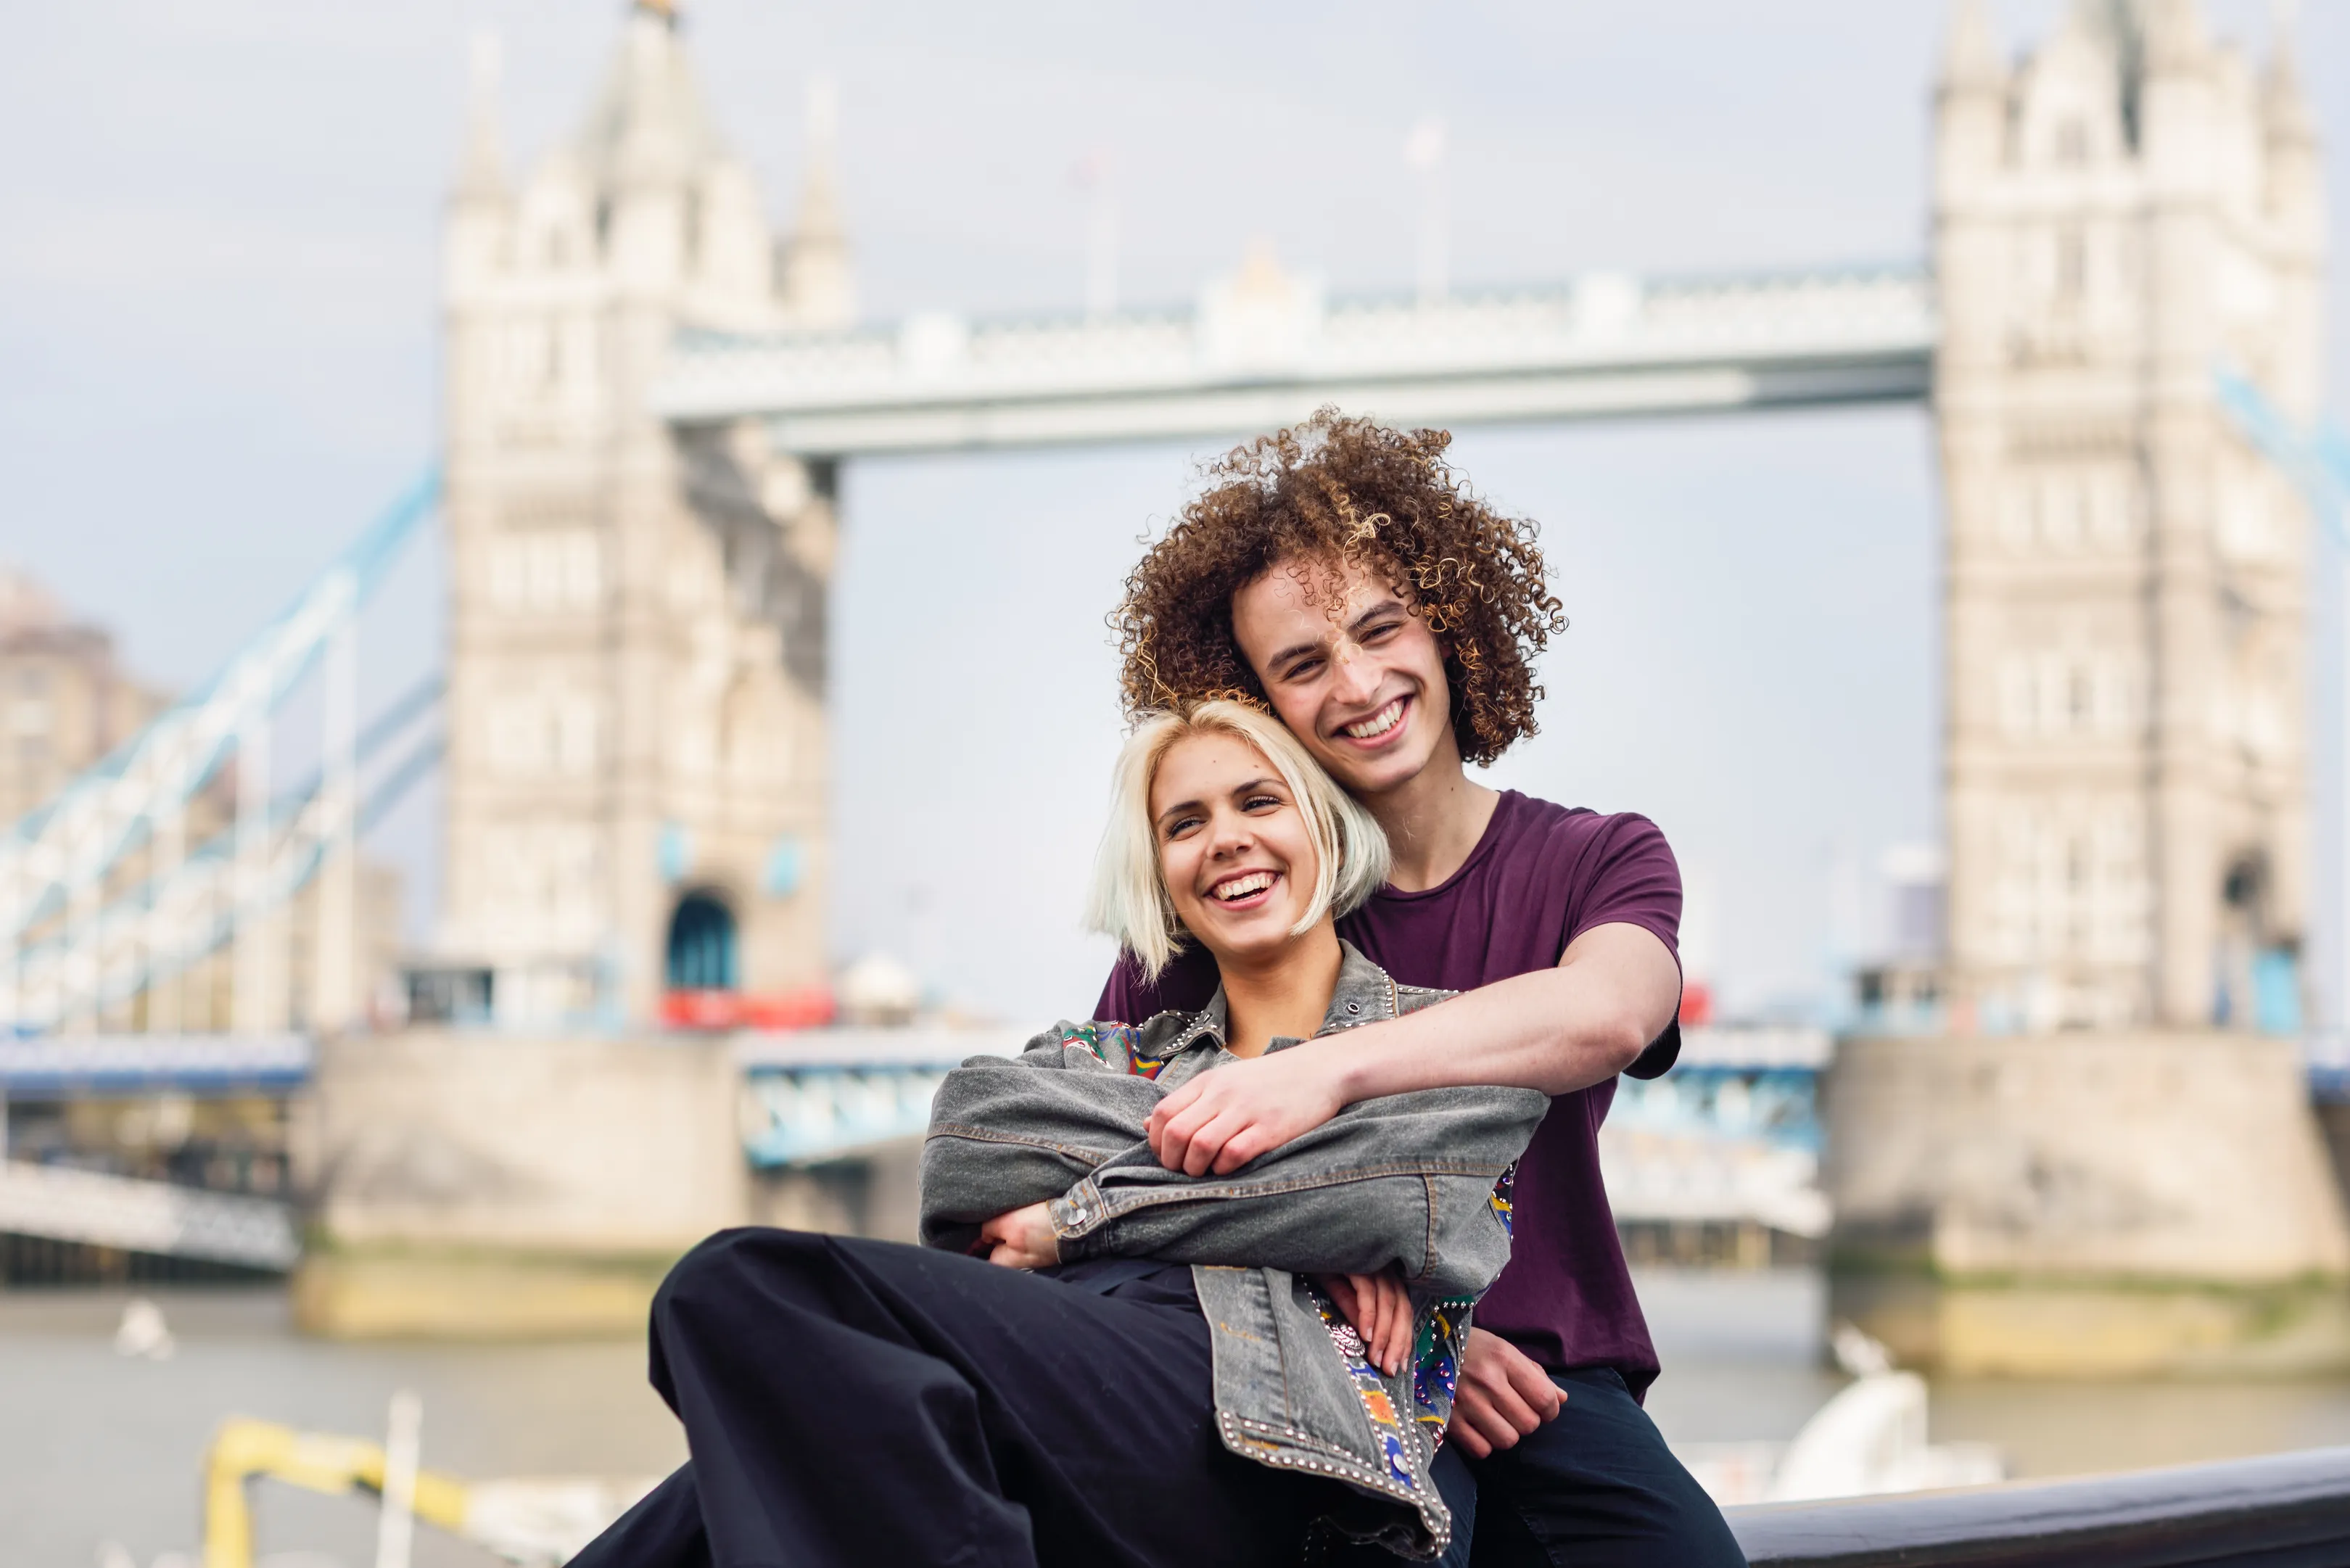 Capture your memories with a photoshoot in London